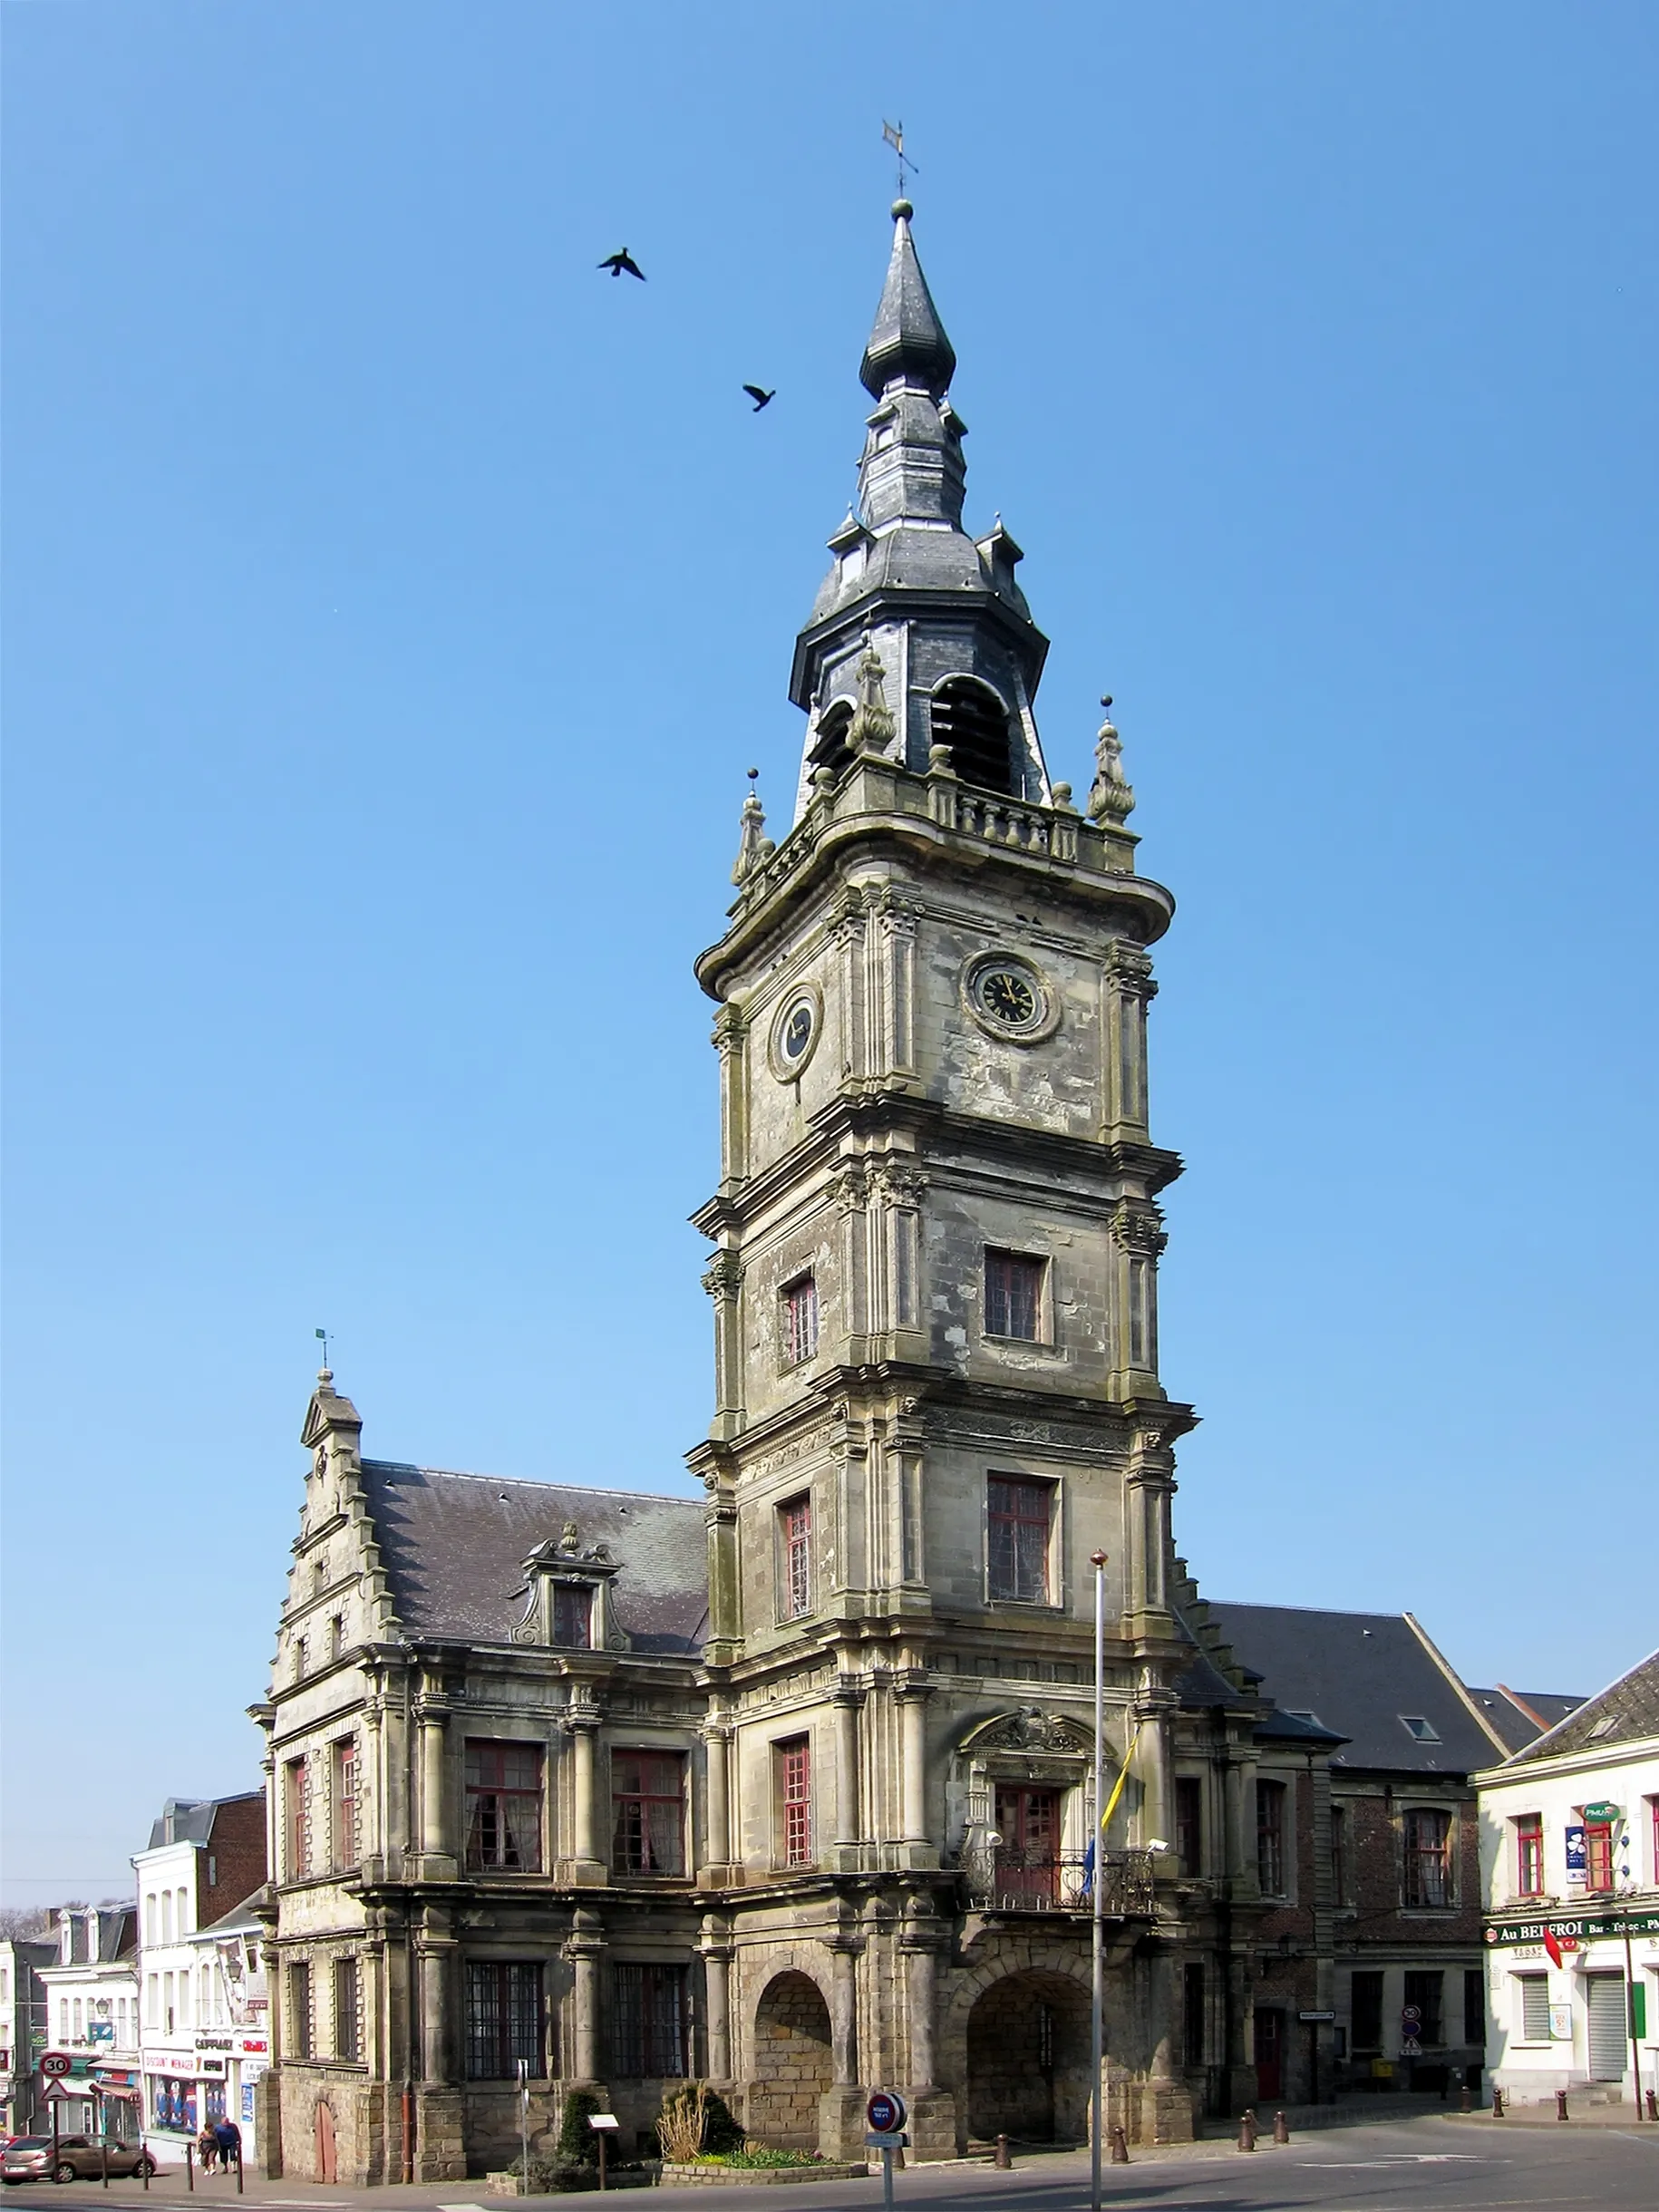 Photo showing: The renaissance style town hall of Le Cateau-Cambrésis (Nord, France), built in 1553, and its belfry built in 1705 by Jacques Nicolas de Valenciennes.